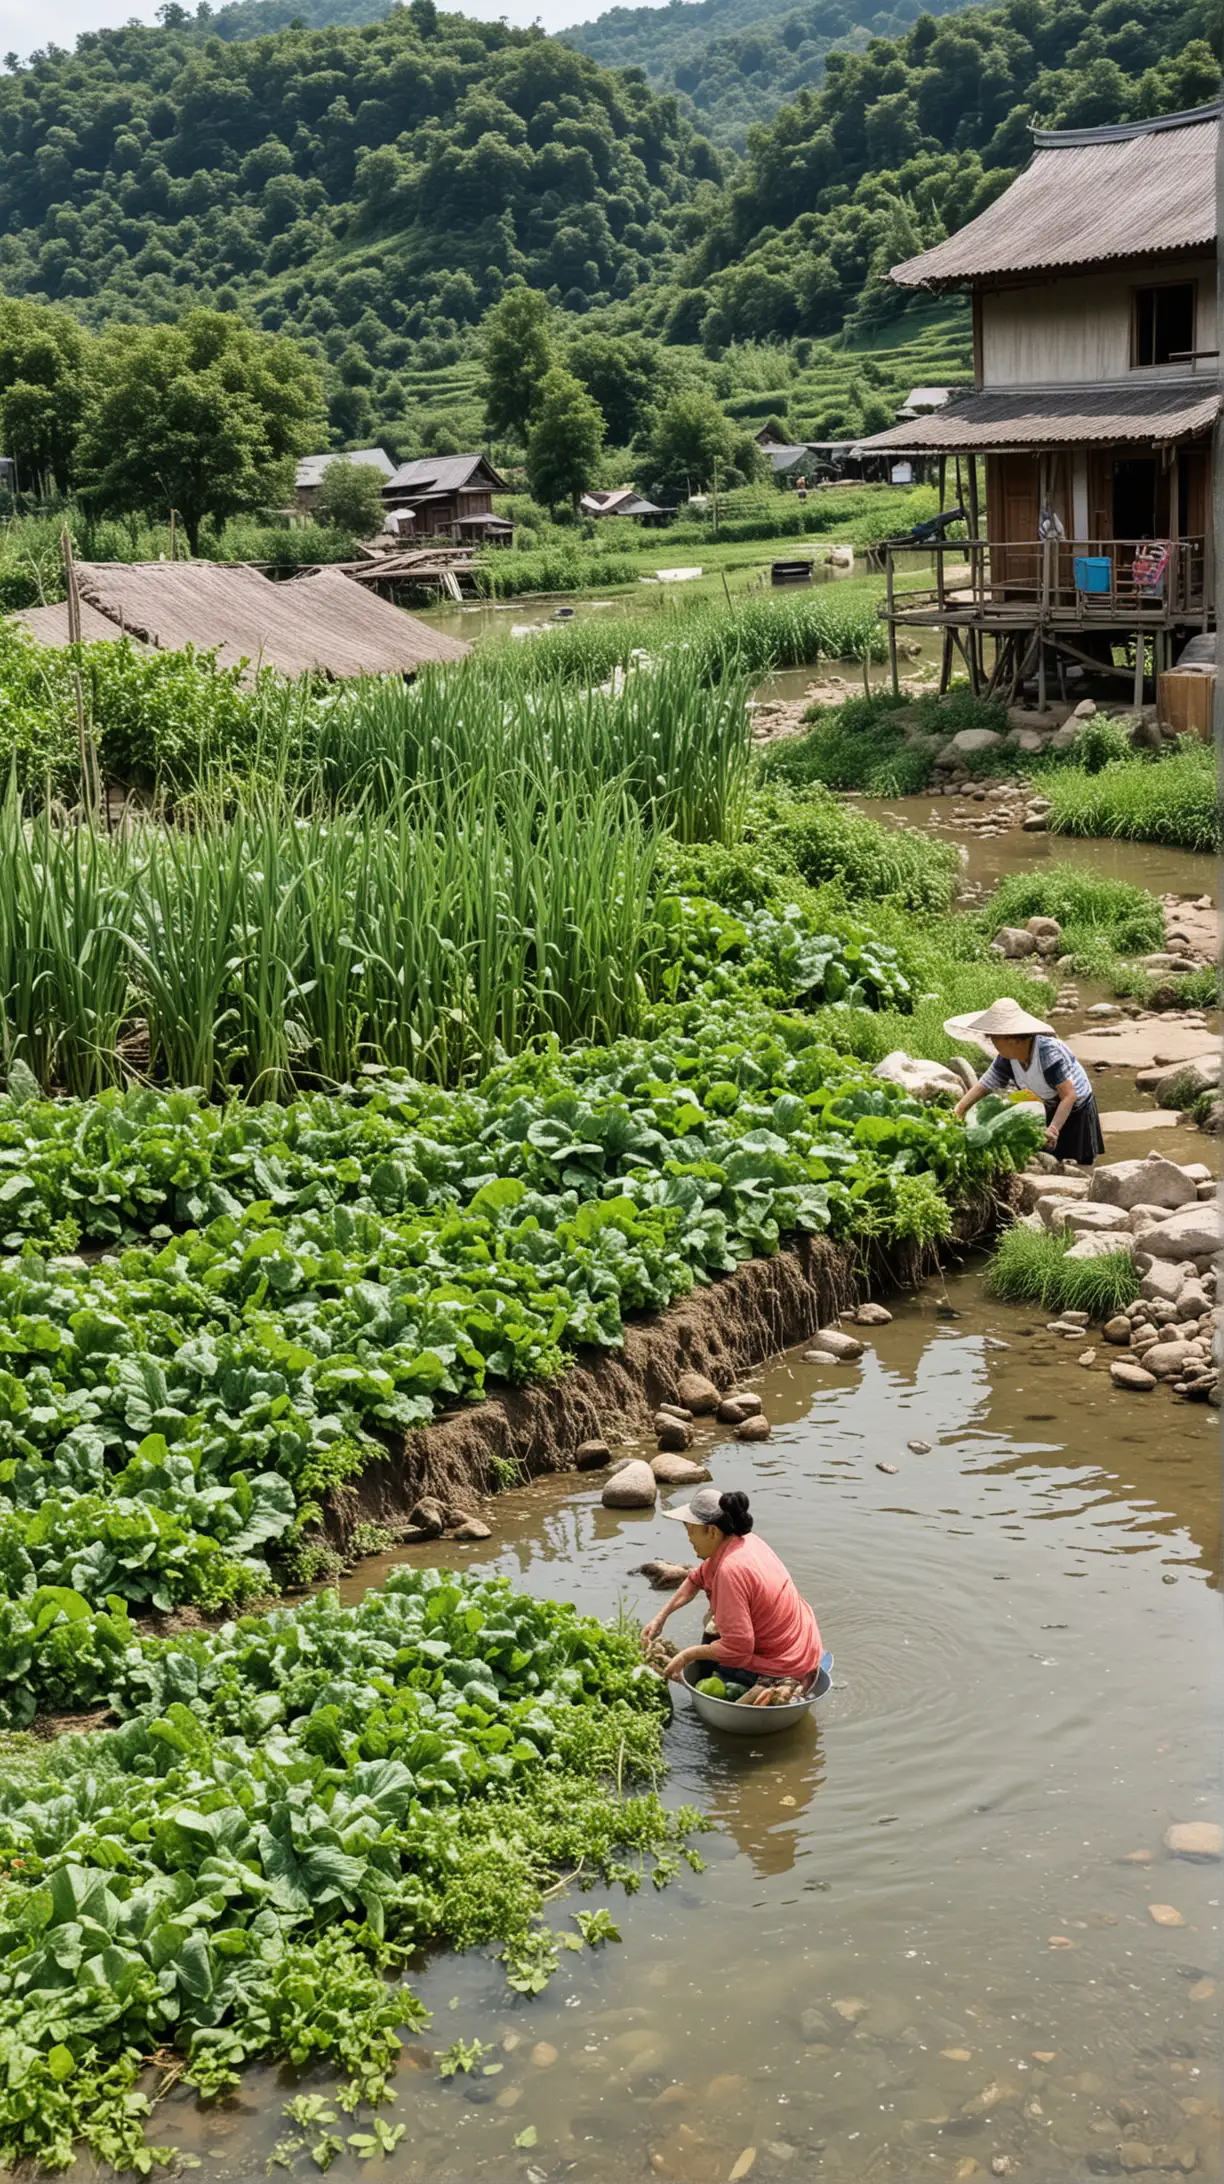 old asian eldery woman washing vegetables on tge clear water river with vegetables fields and her house in the background, summer day.